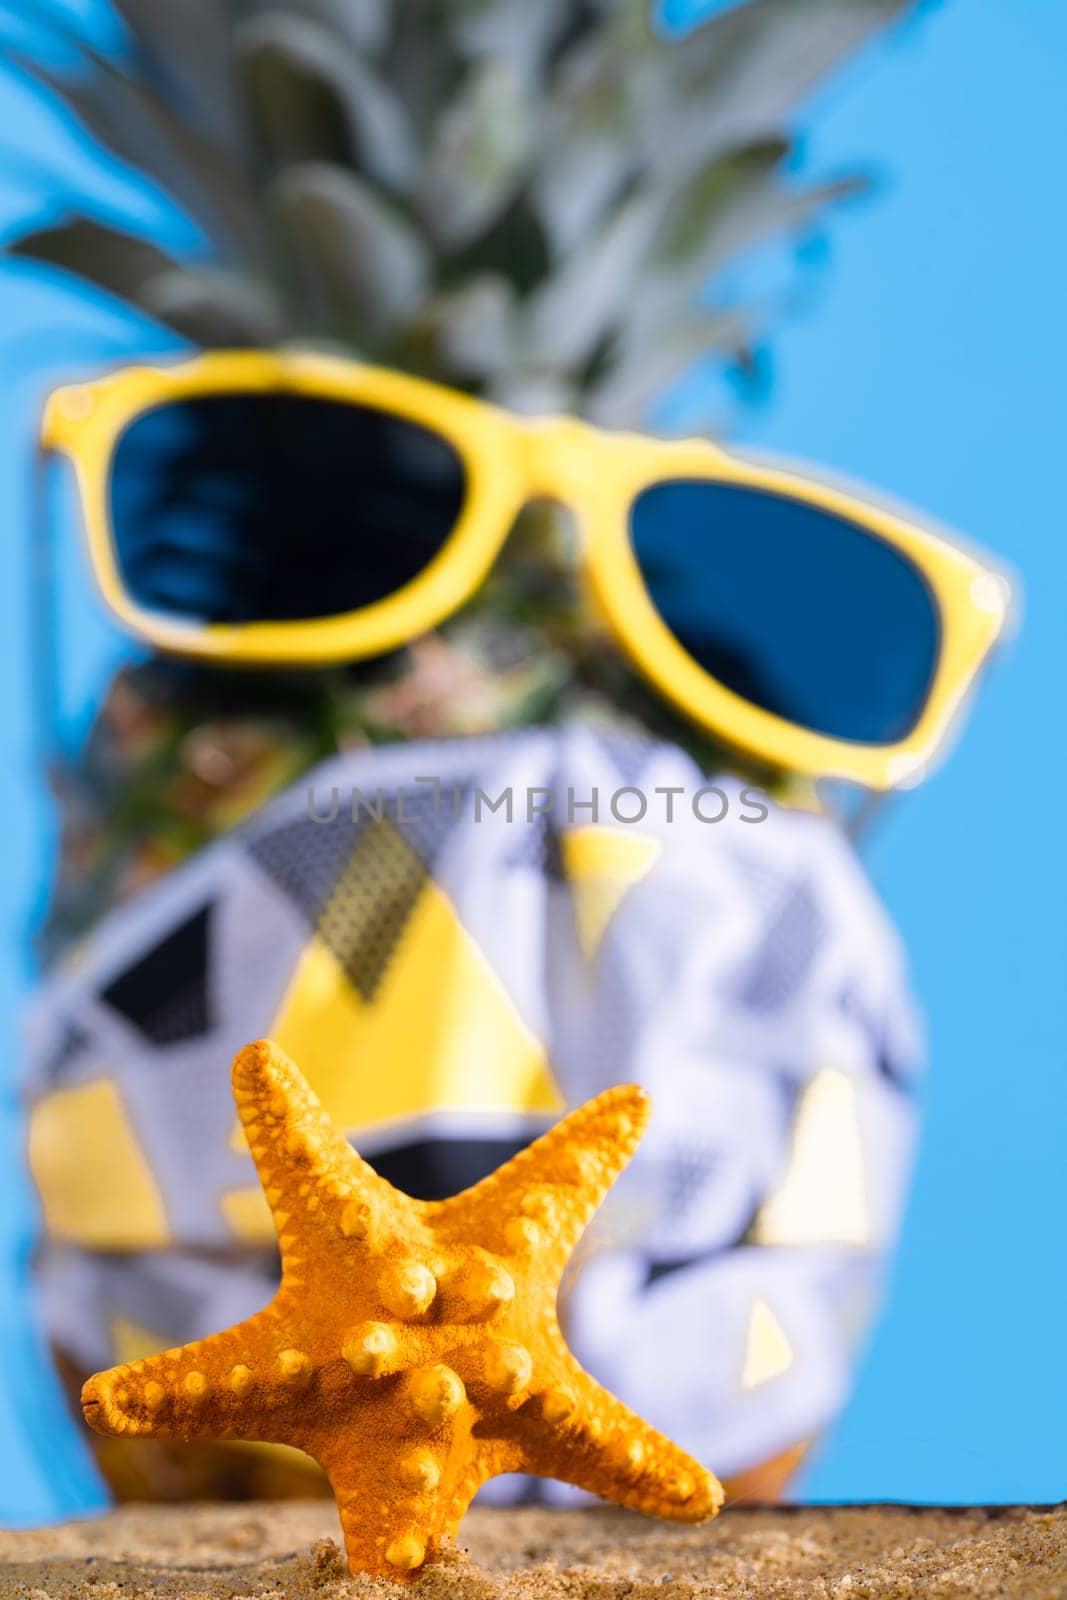 Ripe pineapple. Protective mask. Sunglasses with a yellow frame. Sea beach. Sunny day.